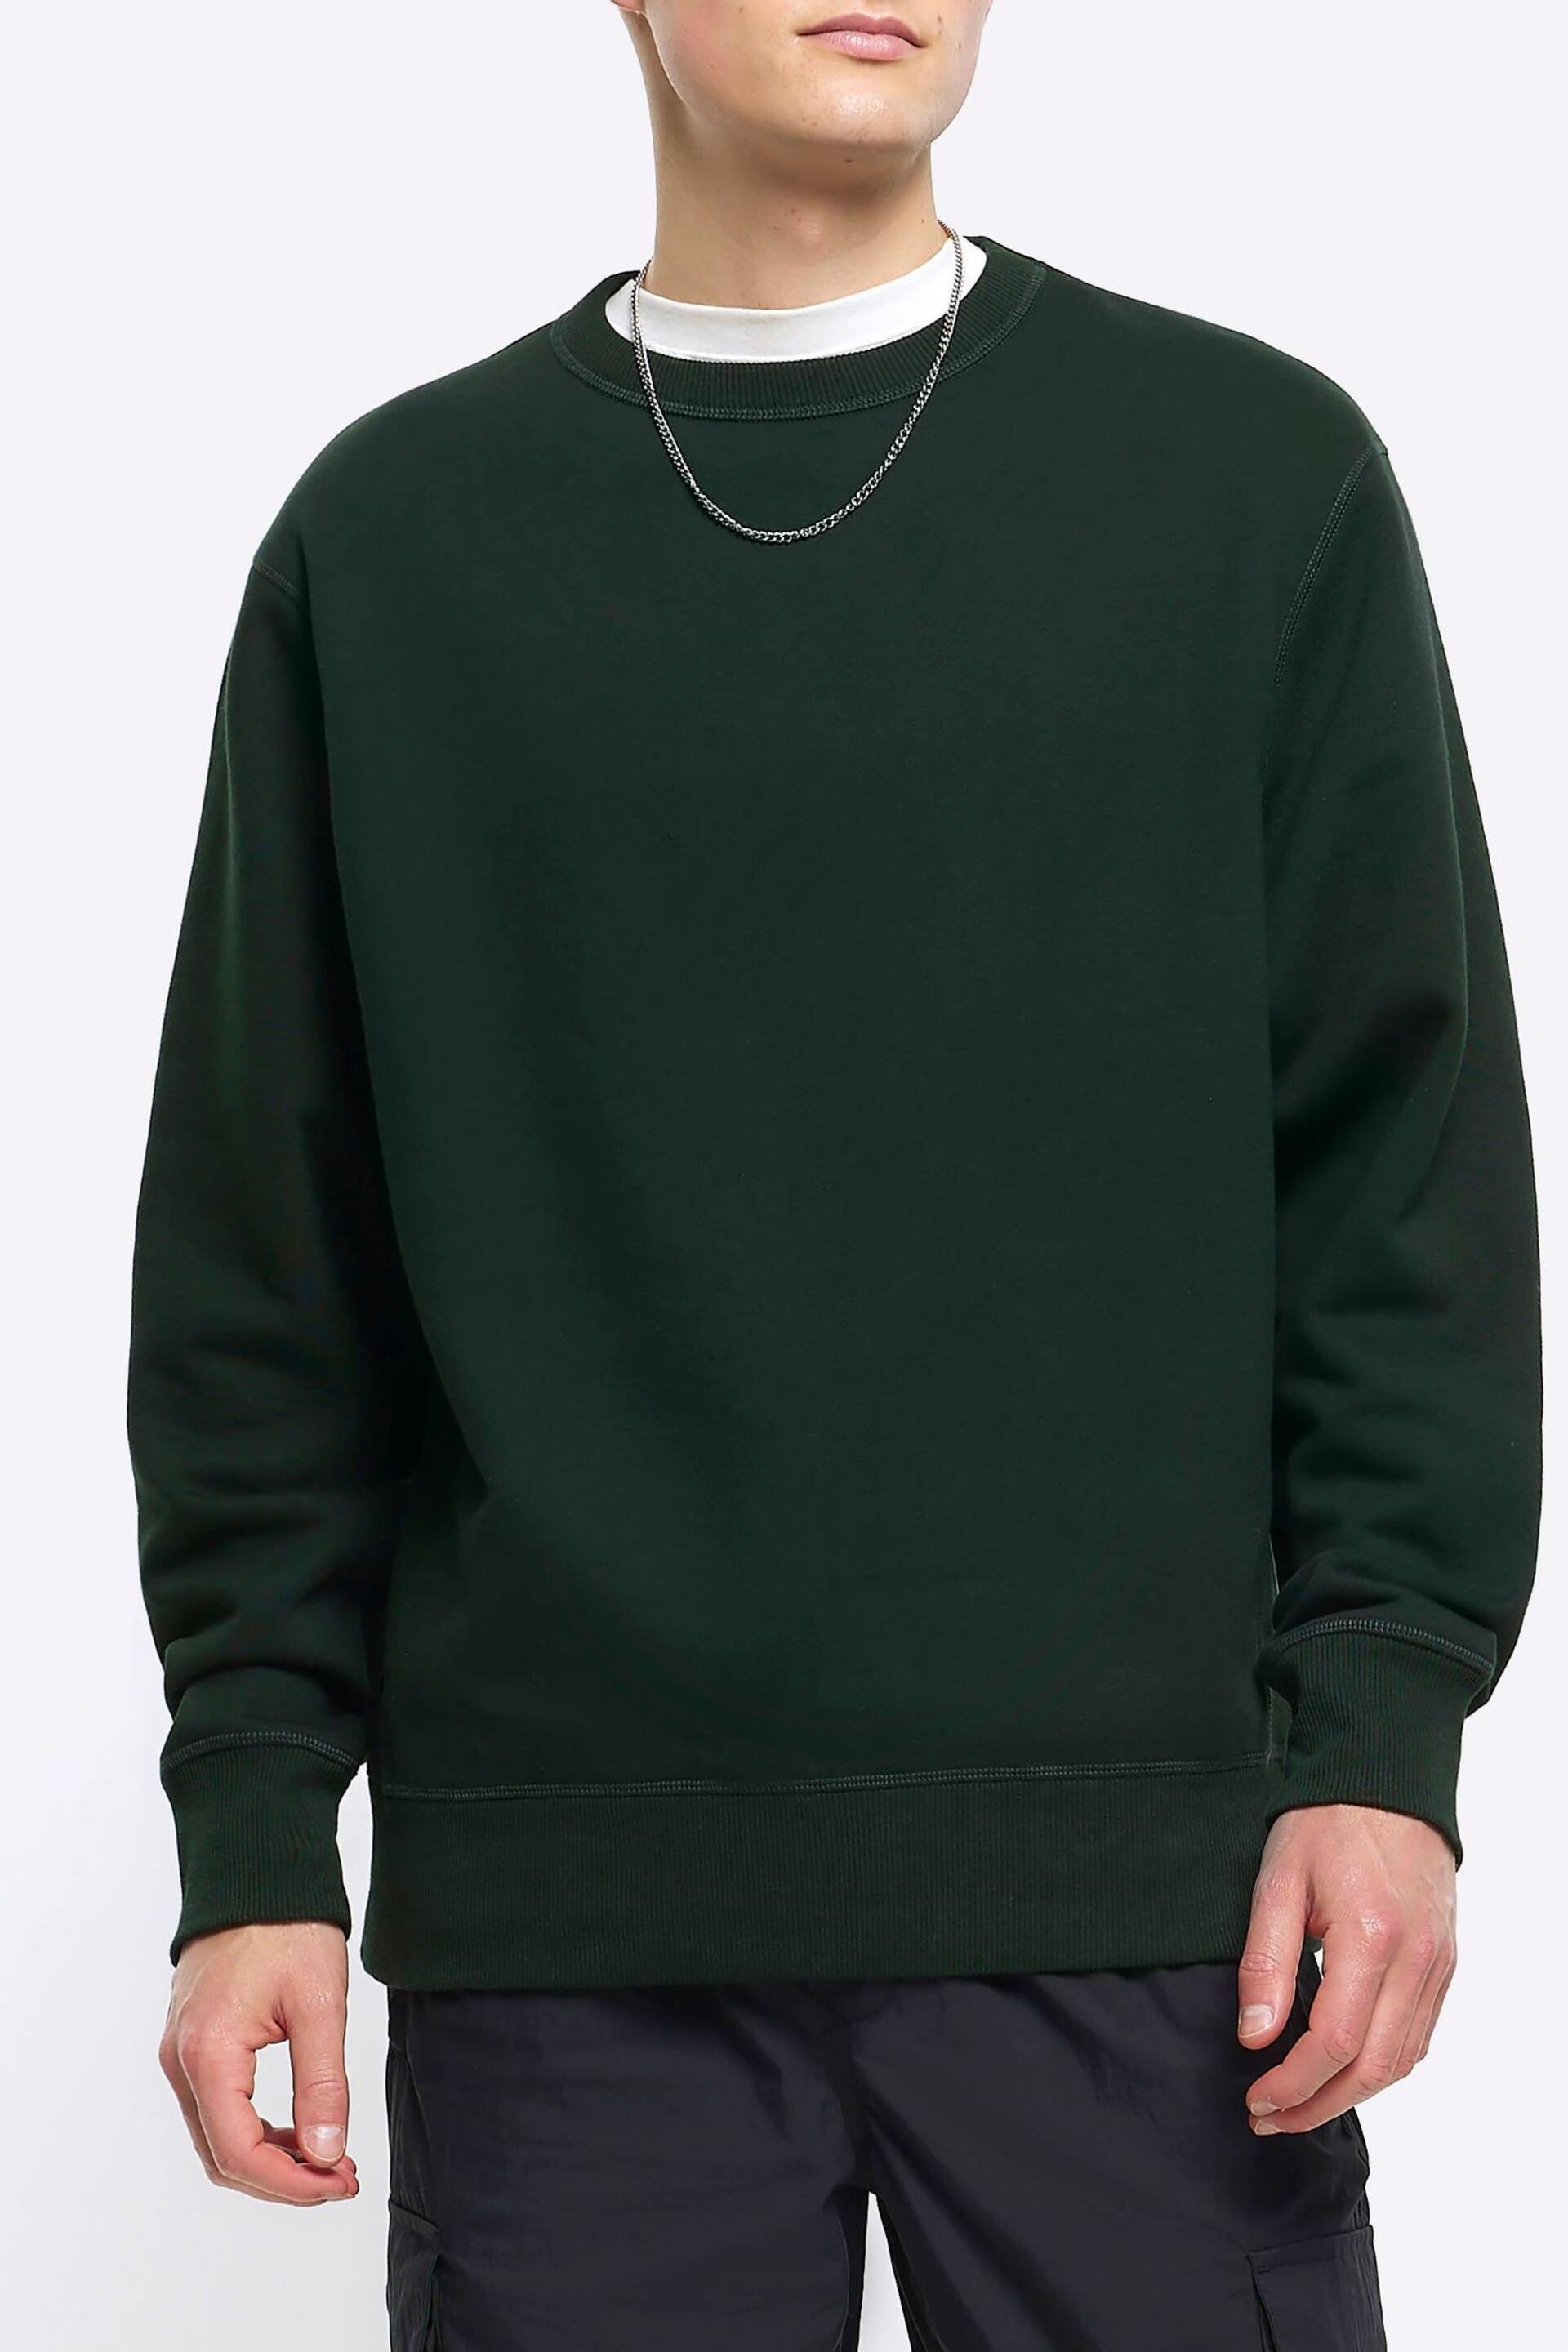 River Island Green Long Sleeve Essential Crew Jacket - Image 1 of 4